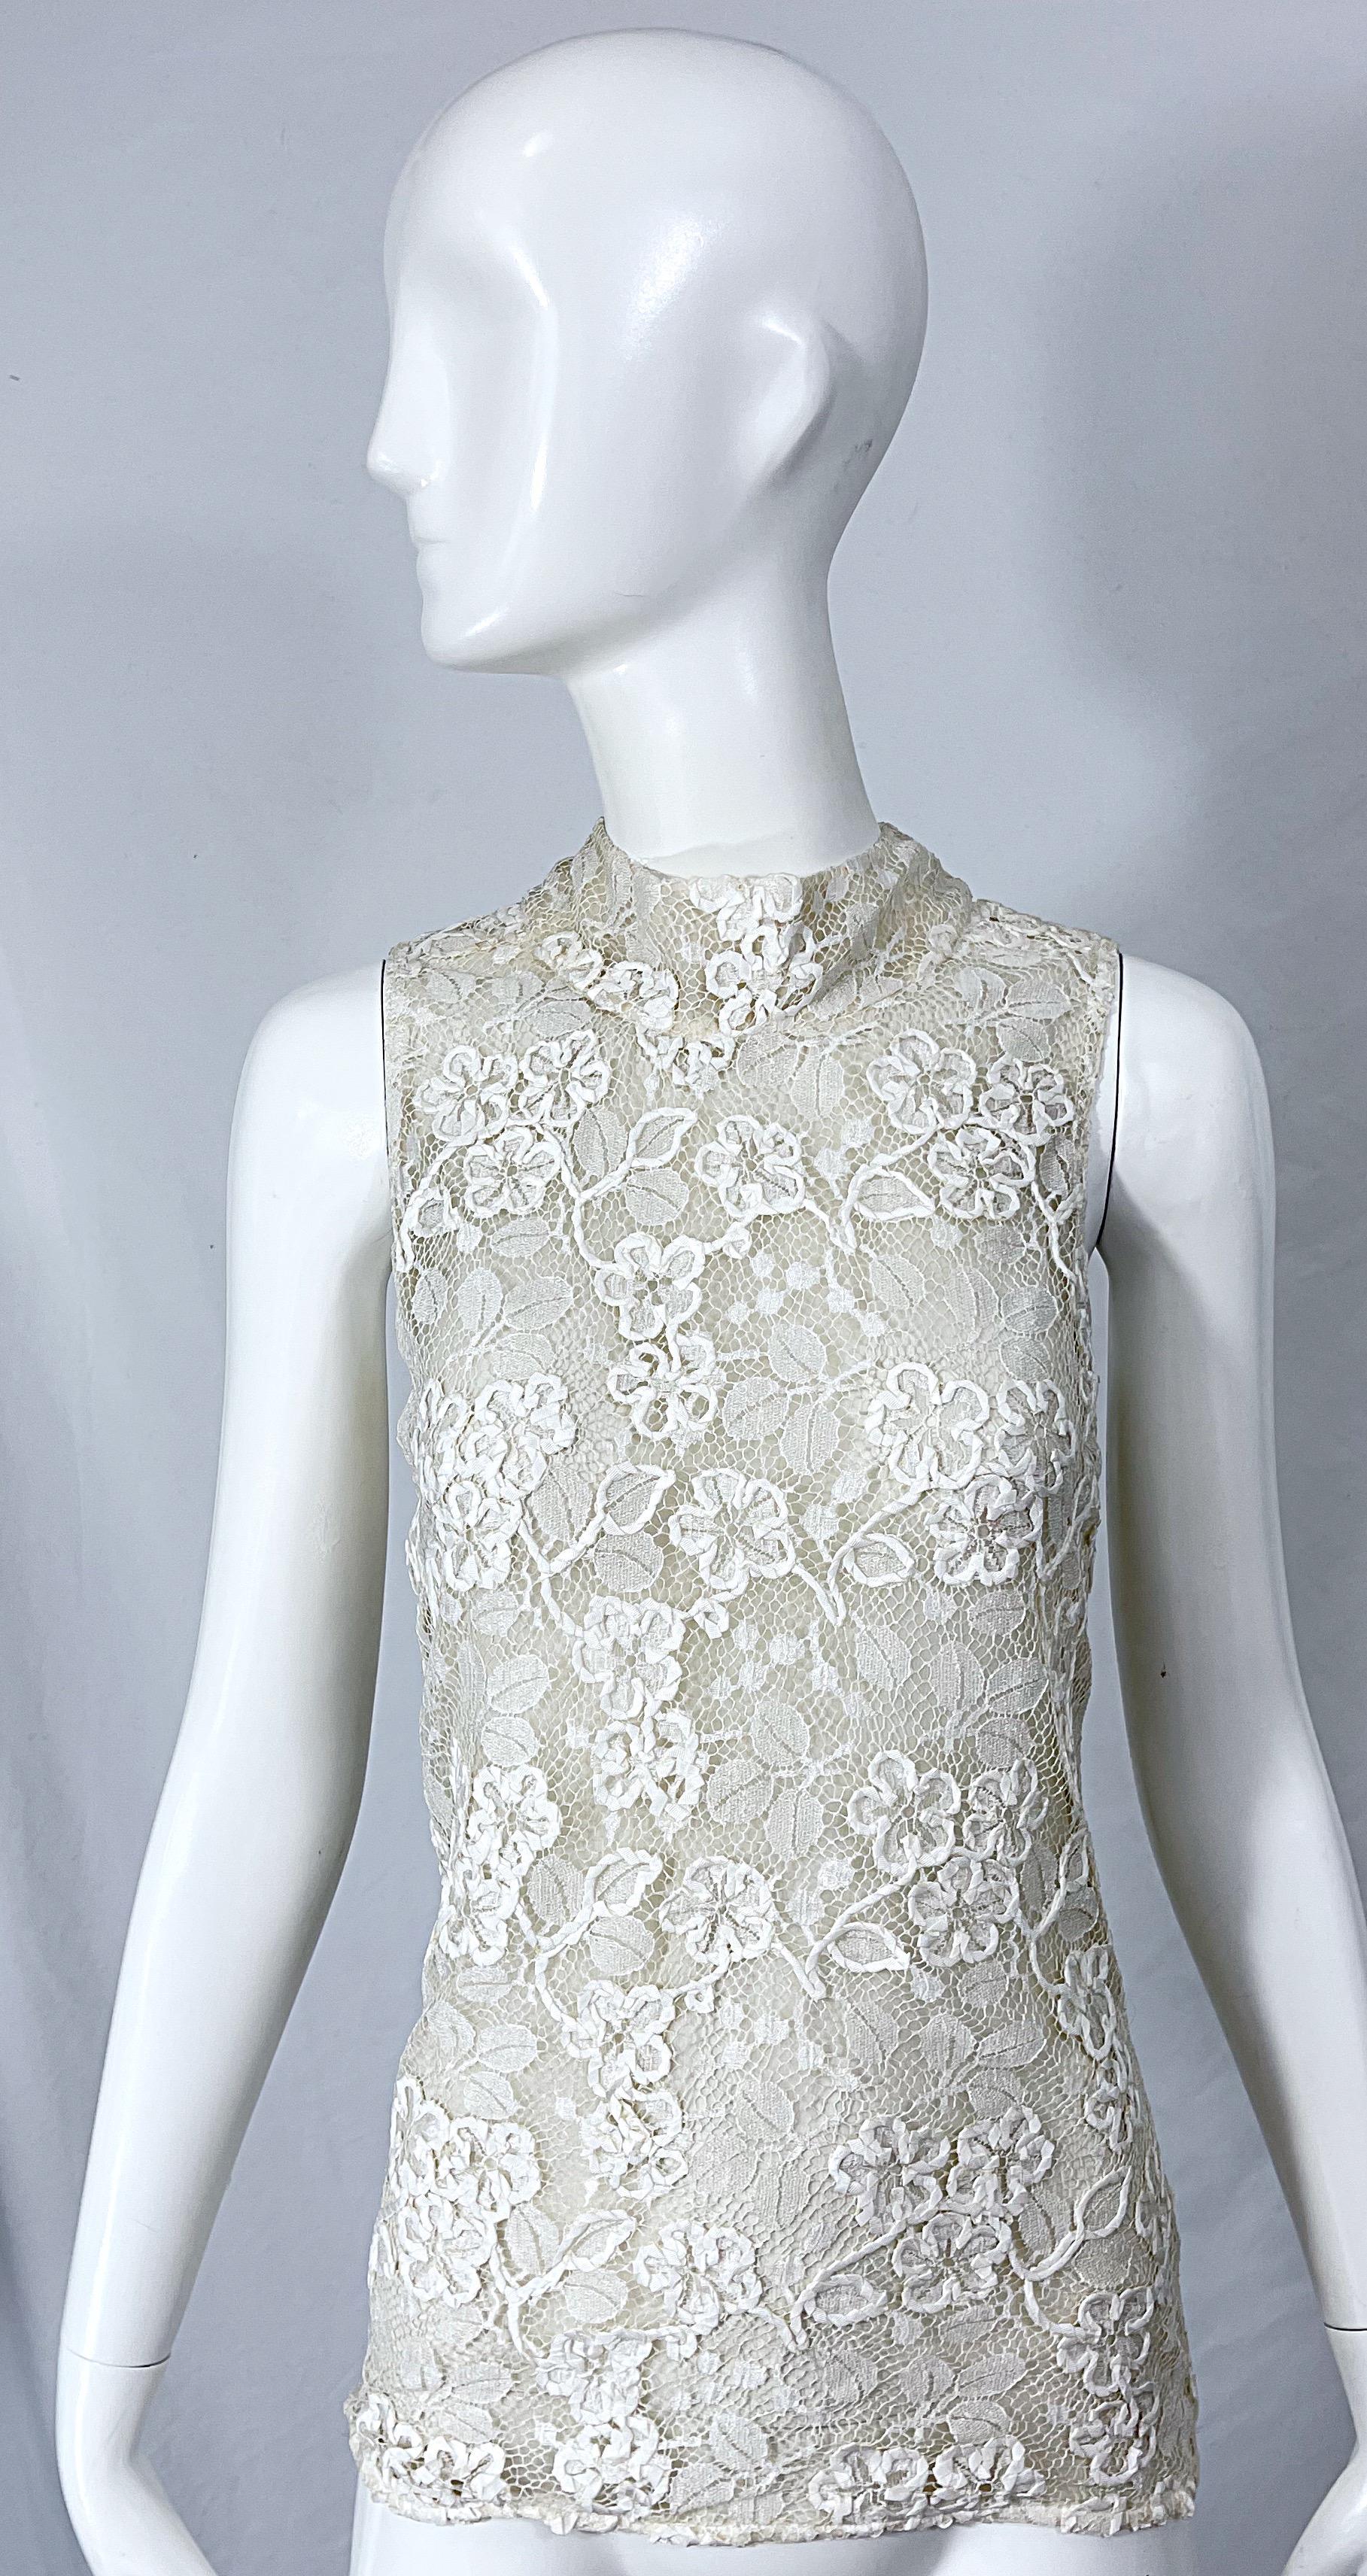 Beautiful vintage YVES SAINT LAURENT Rive Gauche YSL white Belgium lace sleeveless blouse! Features hand embroidered silk lace. Semi sheer white chiffon lining. Three white buttons up the back neck. 
Perfect for any day or evening event. Pair with